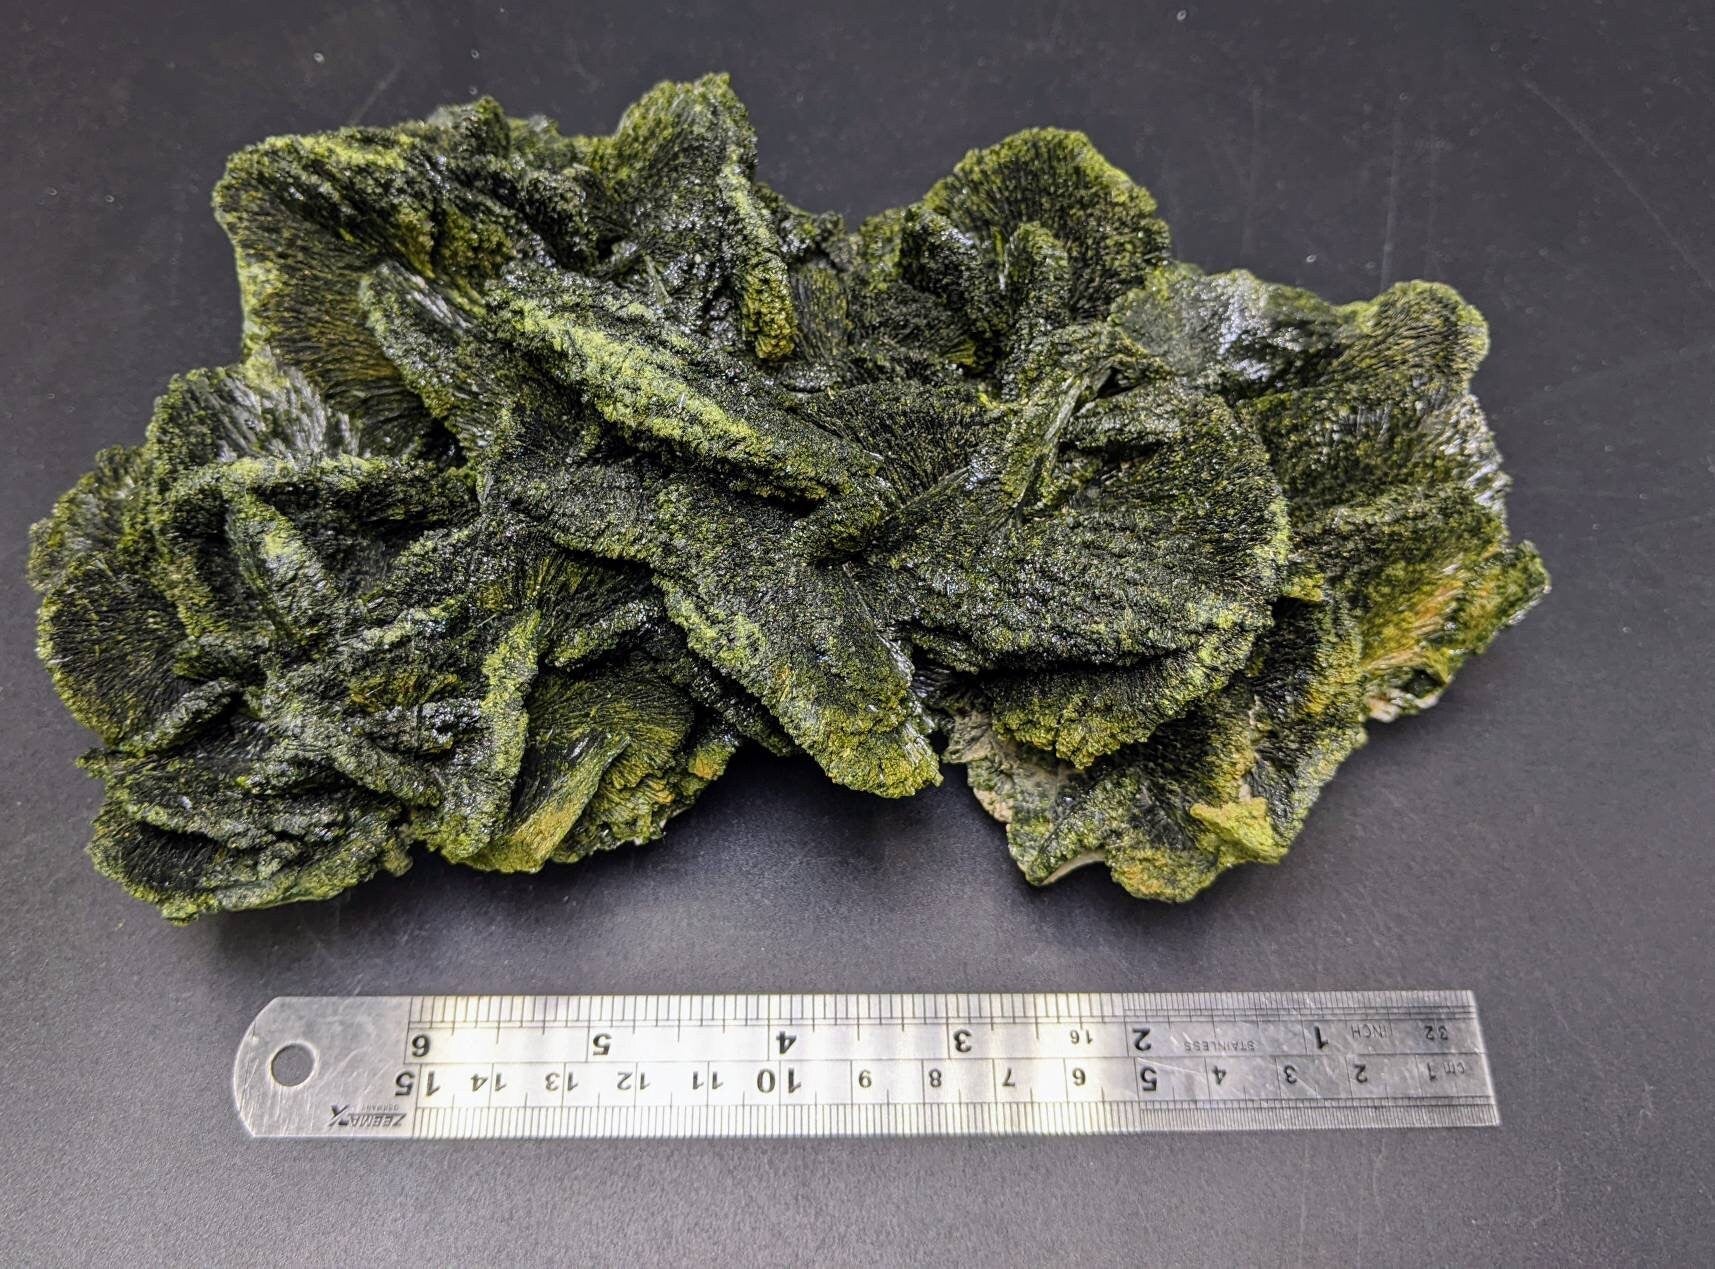 ARSAA GEMS AND MINERALSLarge cabinet massive size cluster of green spray epidote from Baluchistan Pakistan, 1831 grams - Premium  from ARSAA GEMS AND MINERALS - Just $350.00! Shop now at ARSAA GEMS AND MINERALS